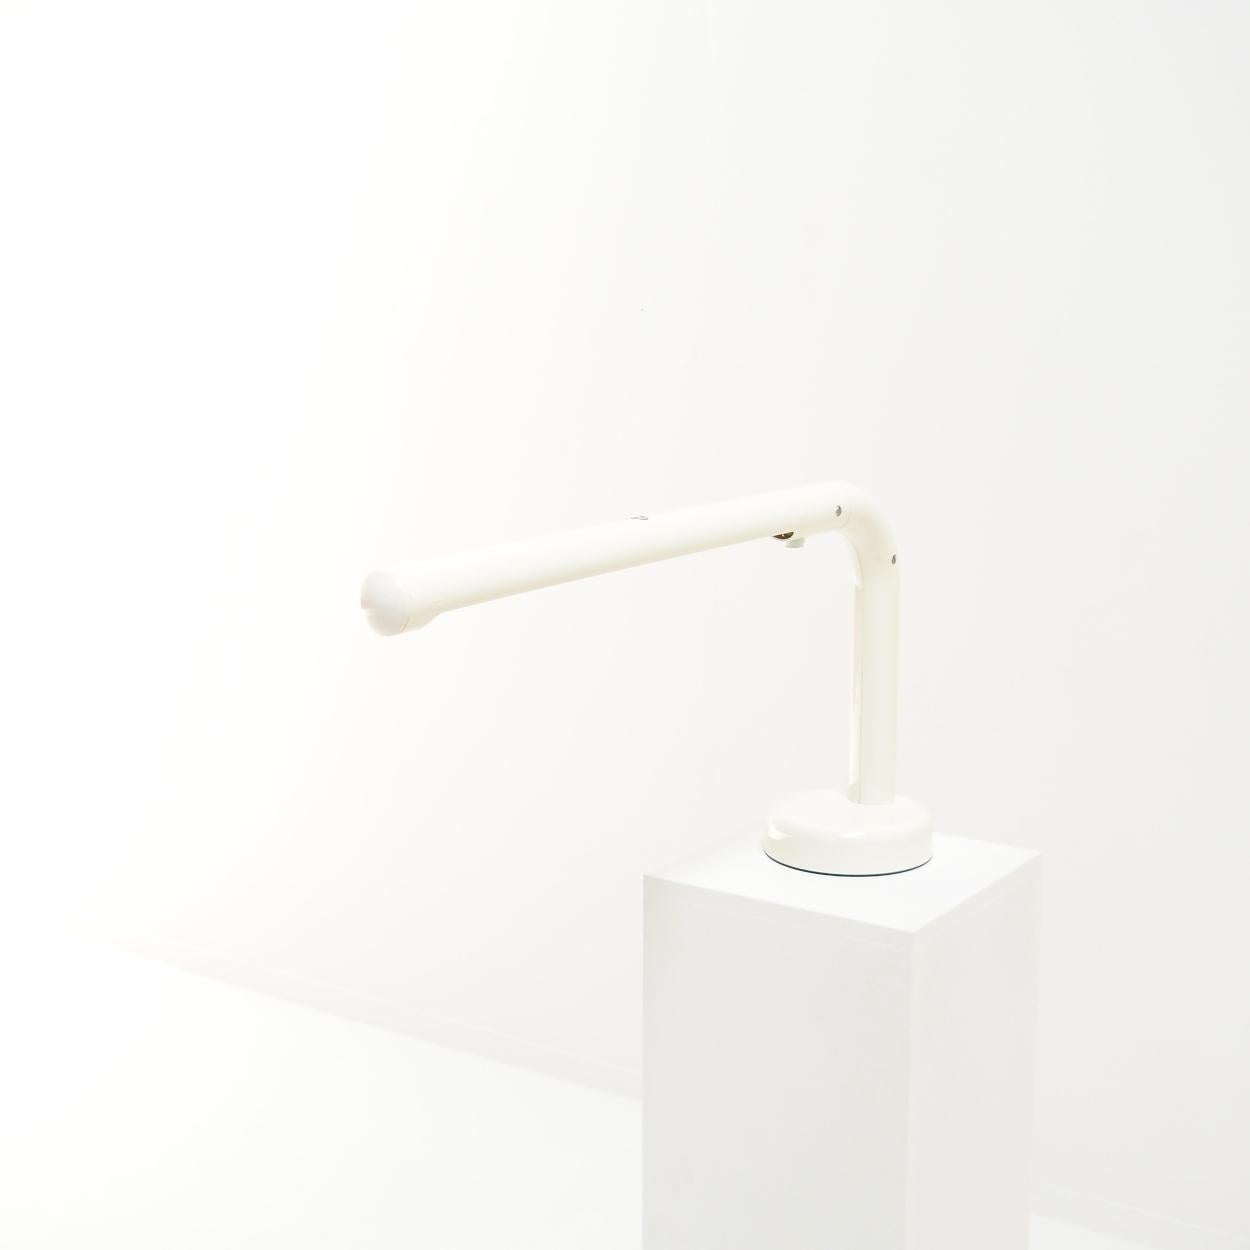 Late 20th Century Anders Pehrson ”Tube Desk Light” for Ateljé Lyktan, Sweden, 1973 For Sale